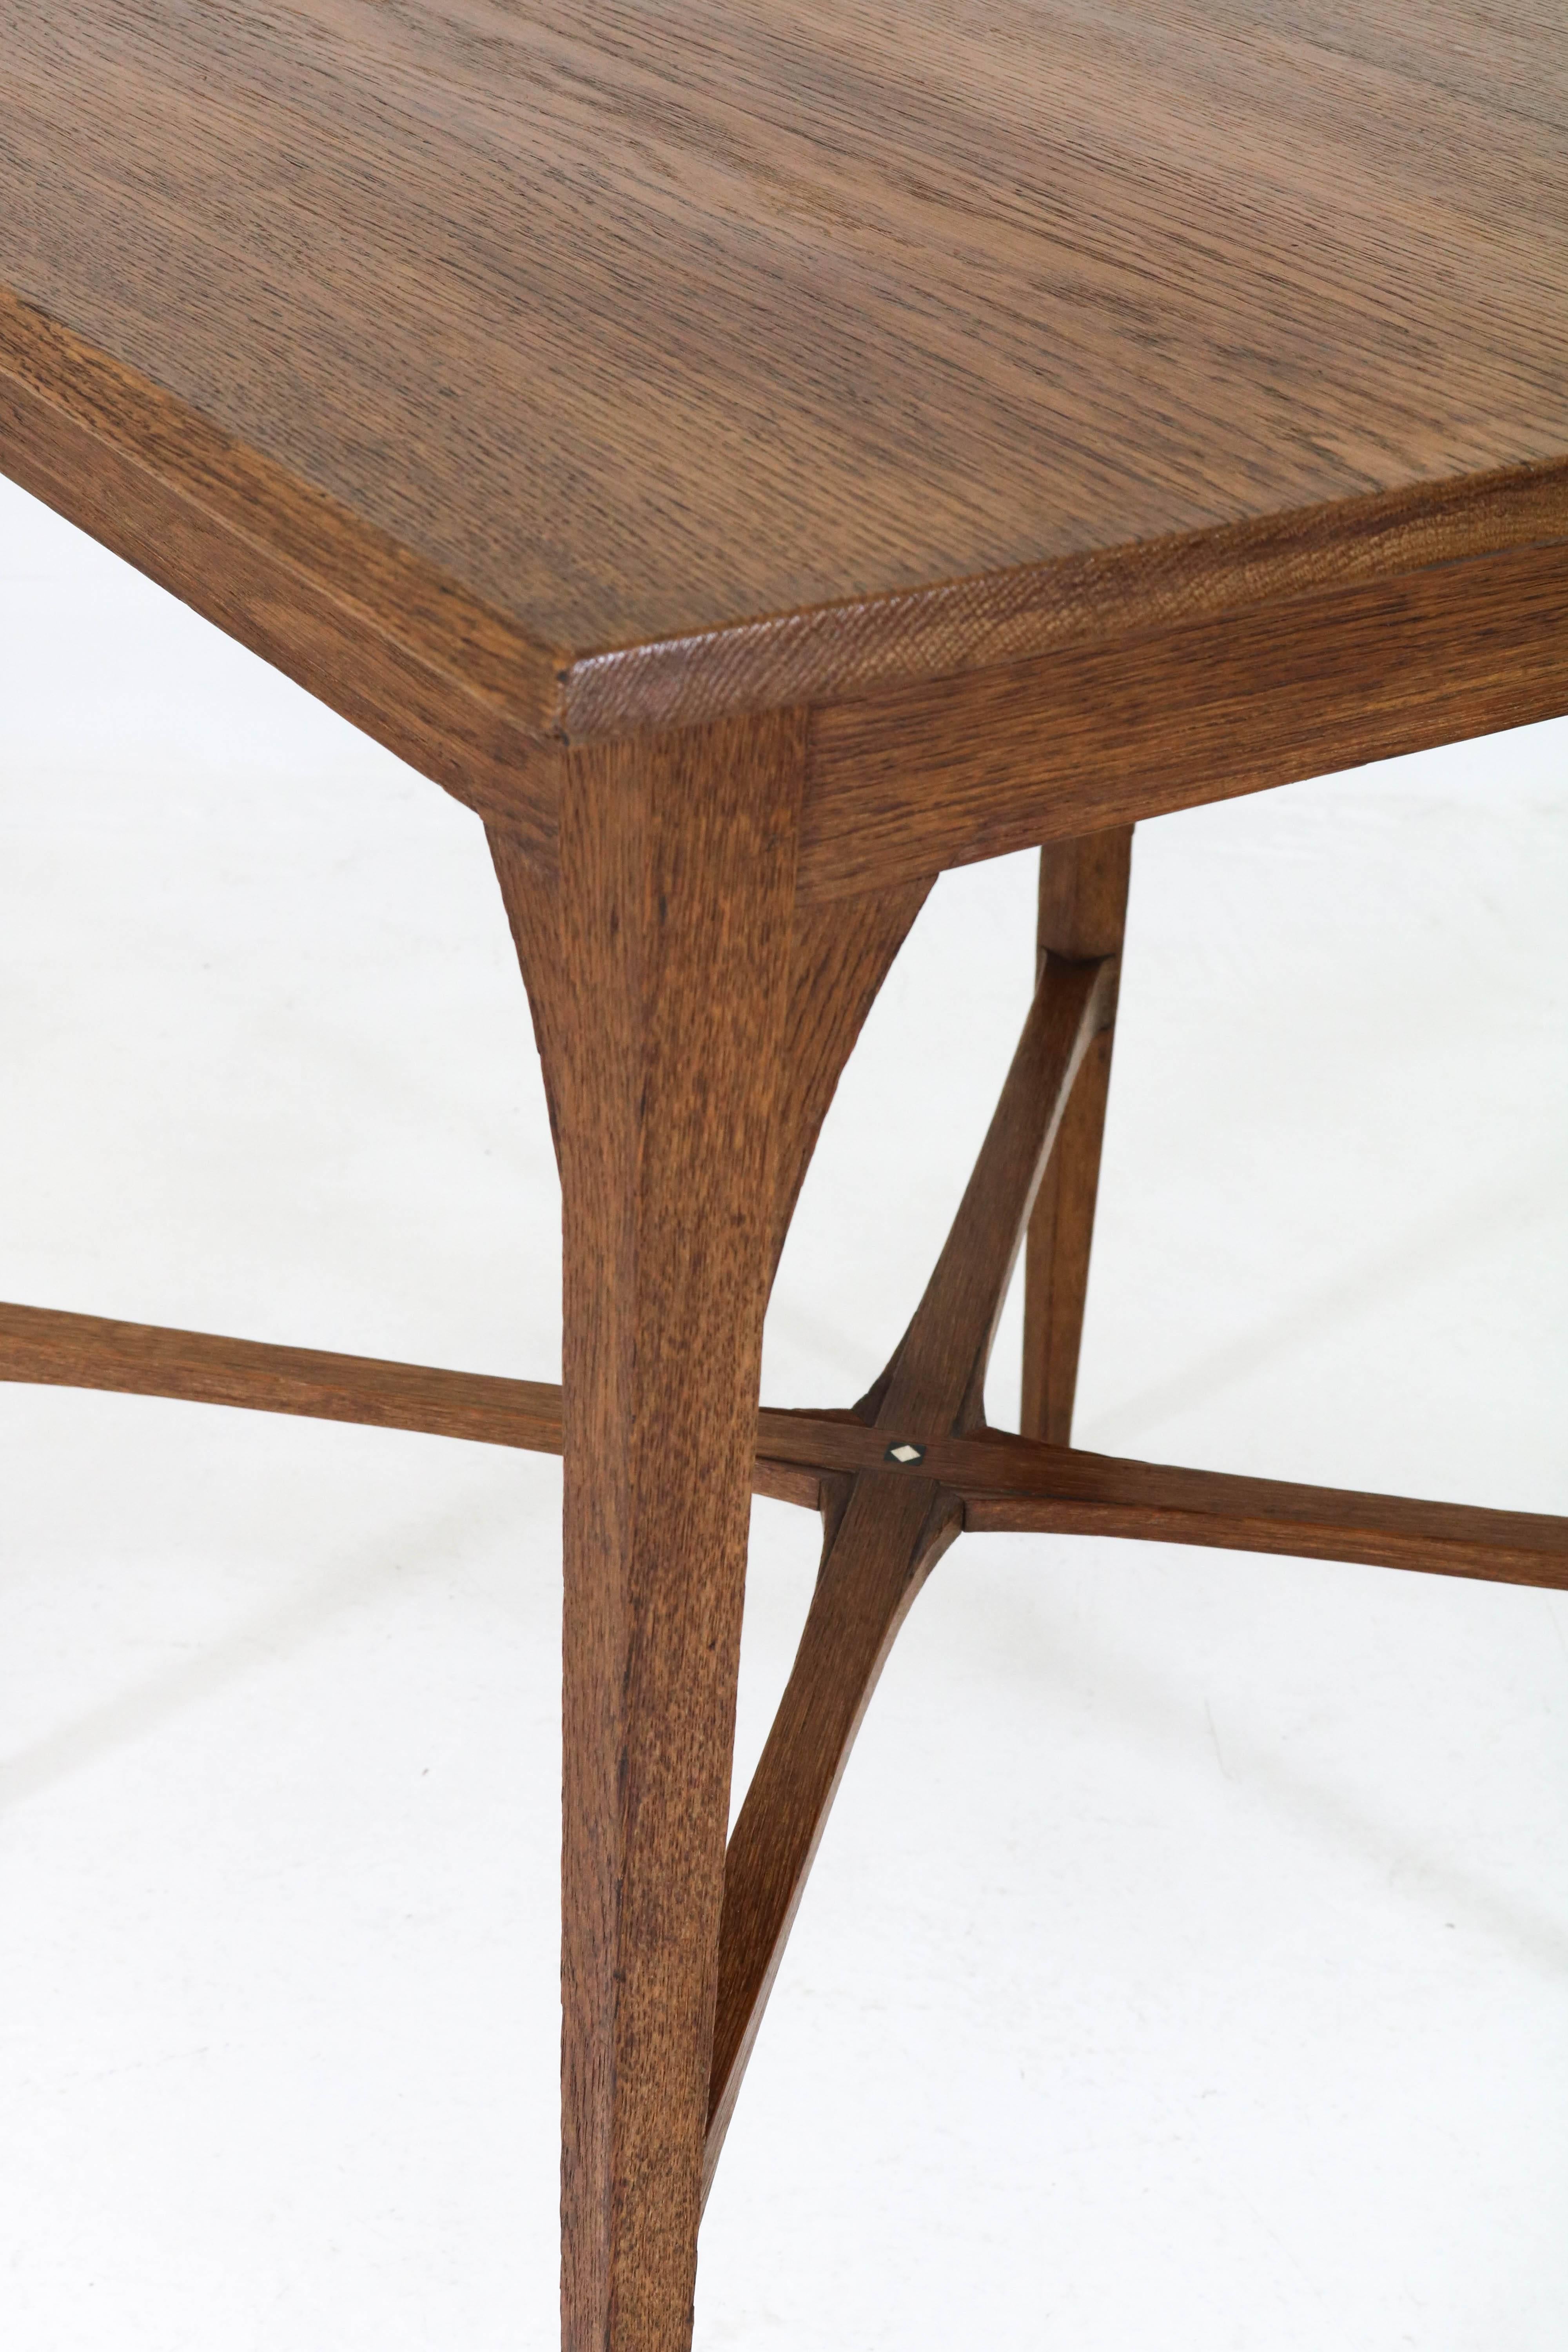 Early 20th Century Dutch Oak Arts & Crafts Occasional Table by J.A. Huizinga, 1900s